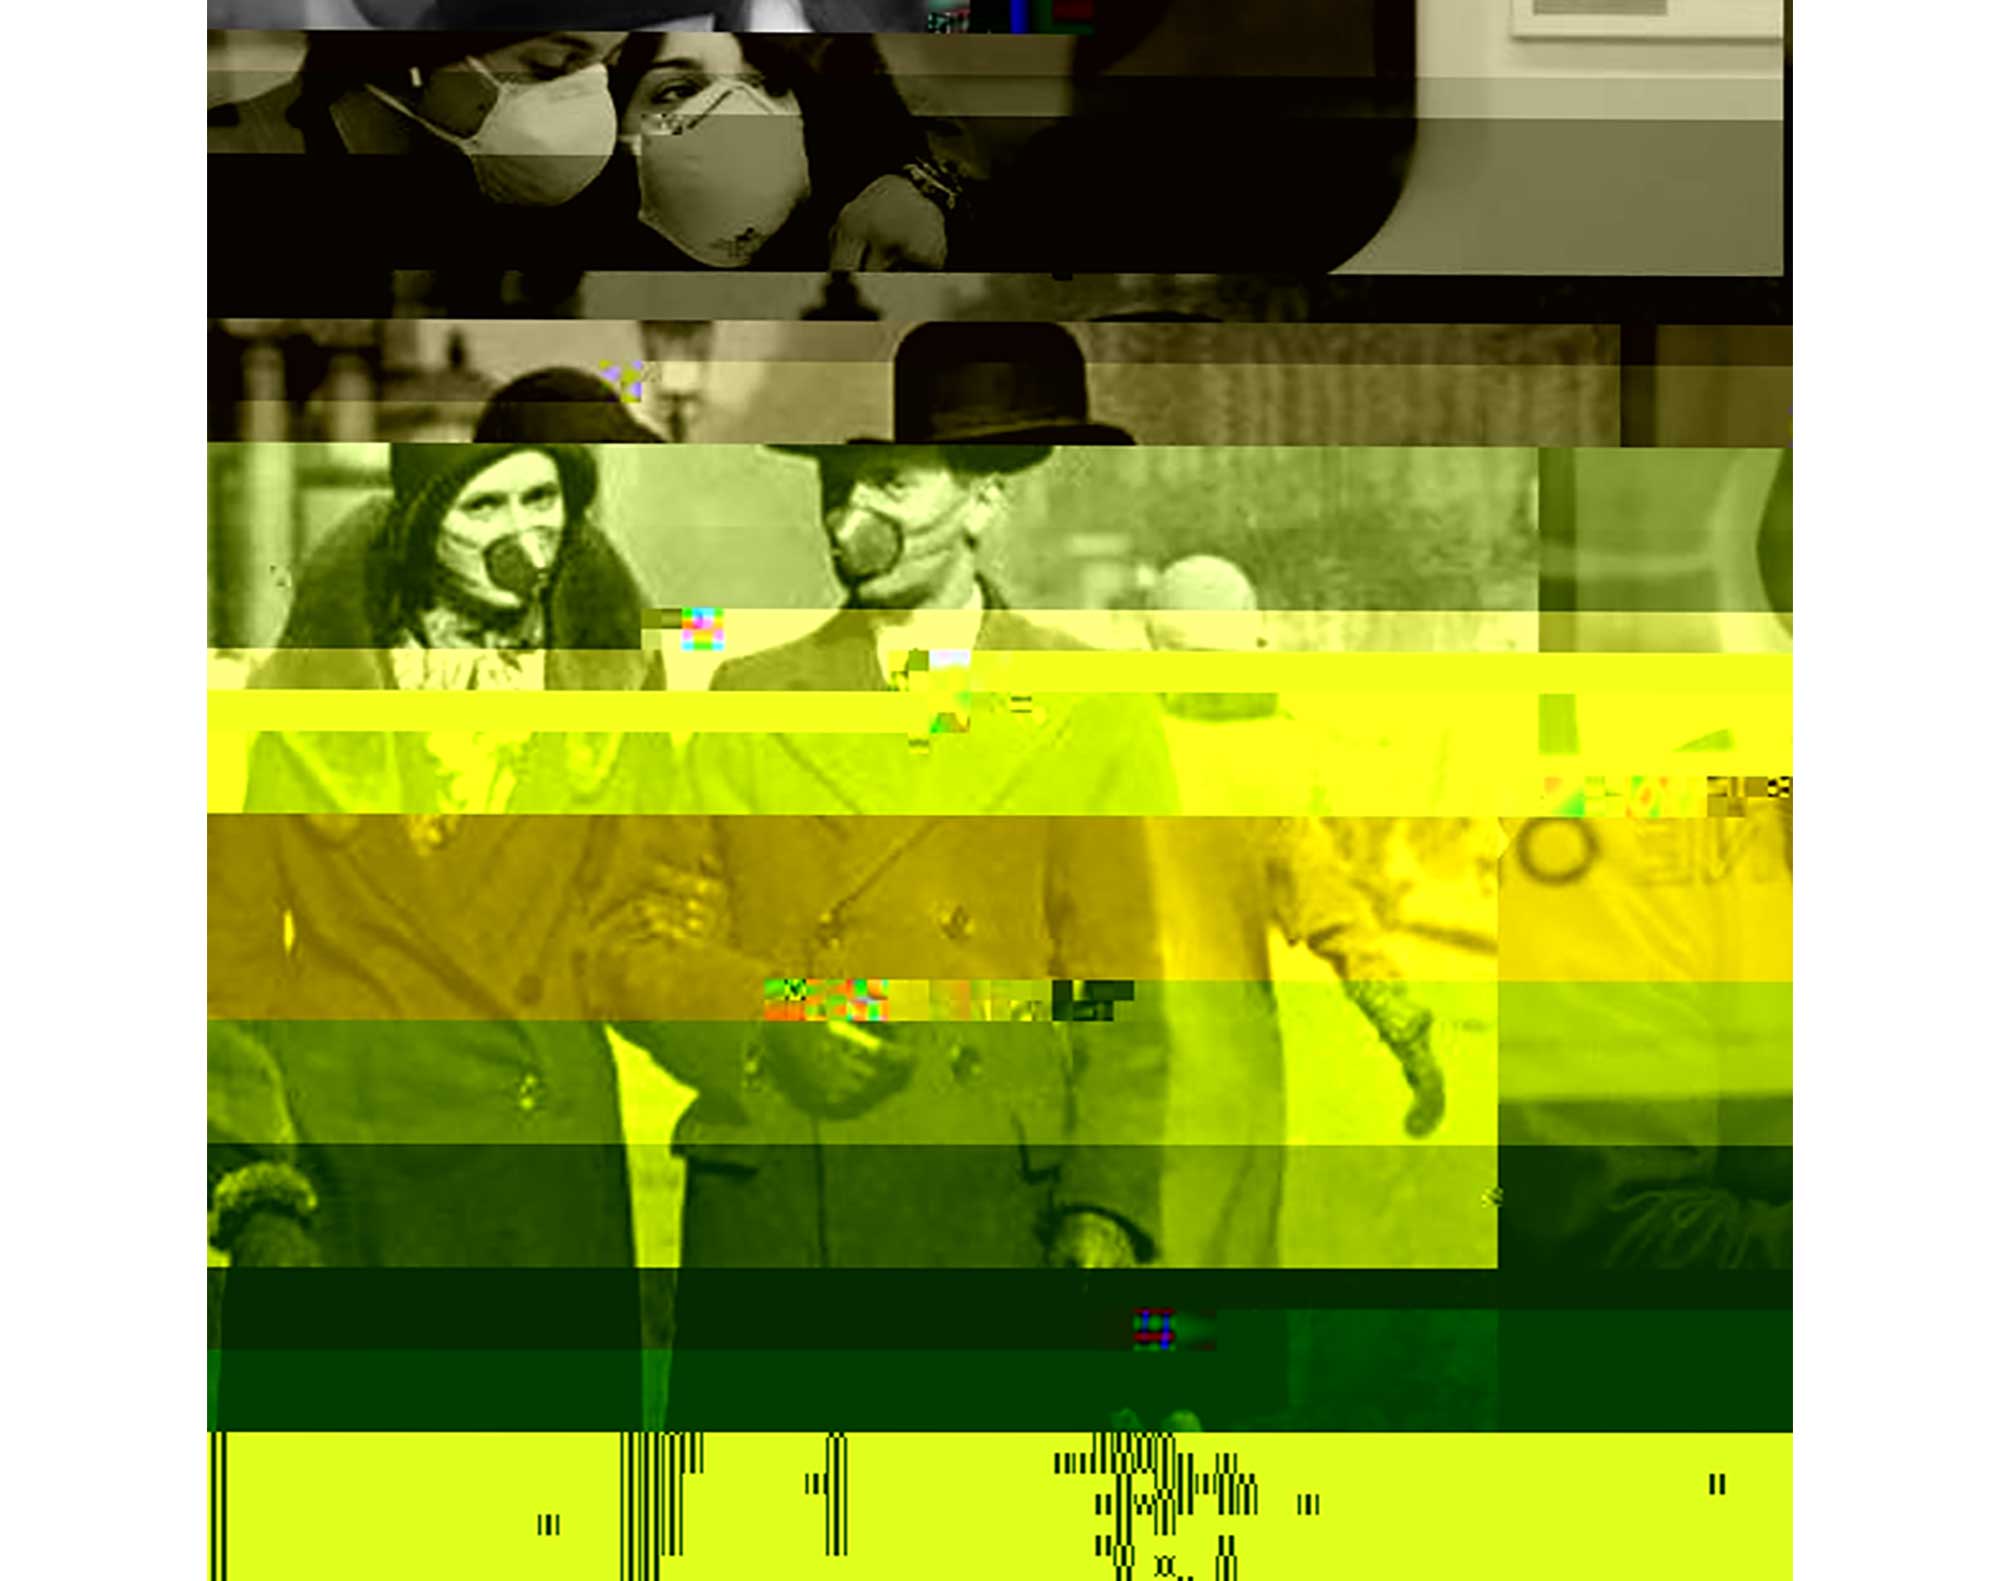 An image of a couple wearing masks during the Spanish flumerged with an image of a couple wearing masks riding the metro during COVID-19. The images were digitally manipulated with the process of data bending/code hacking.